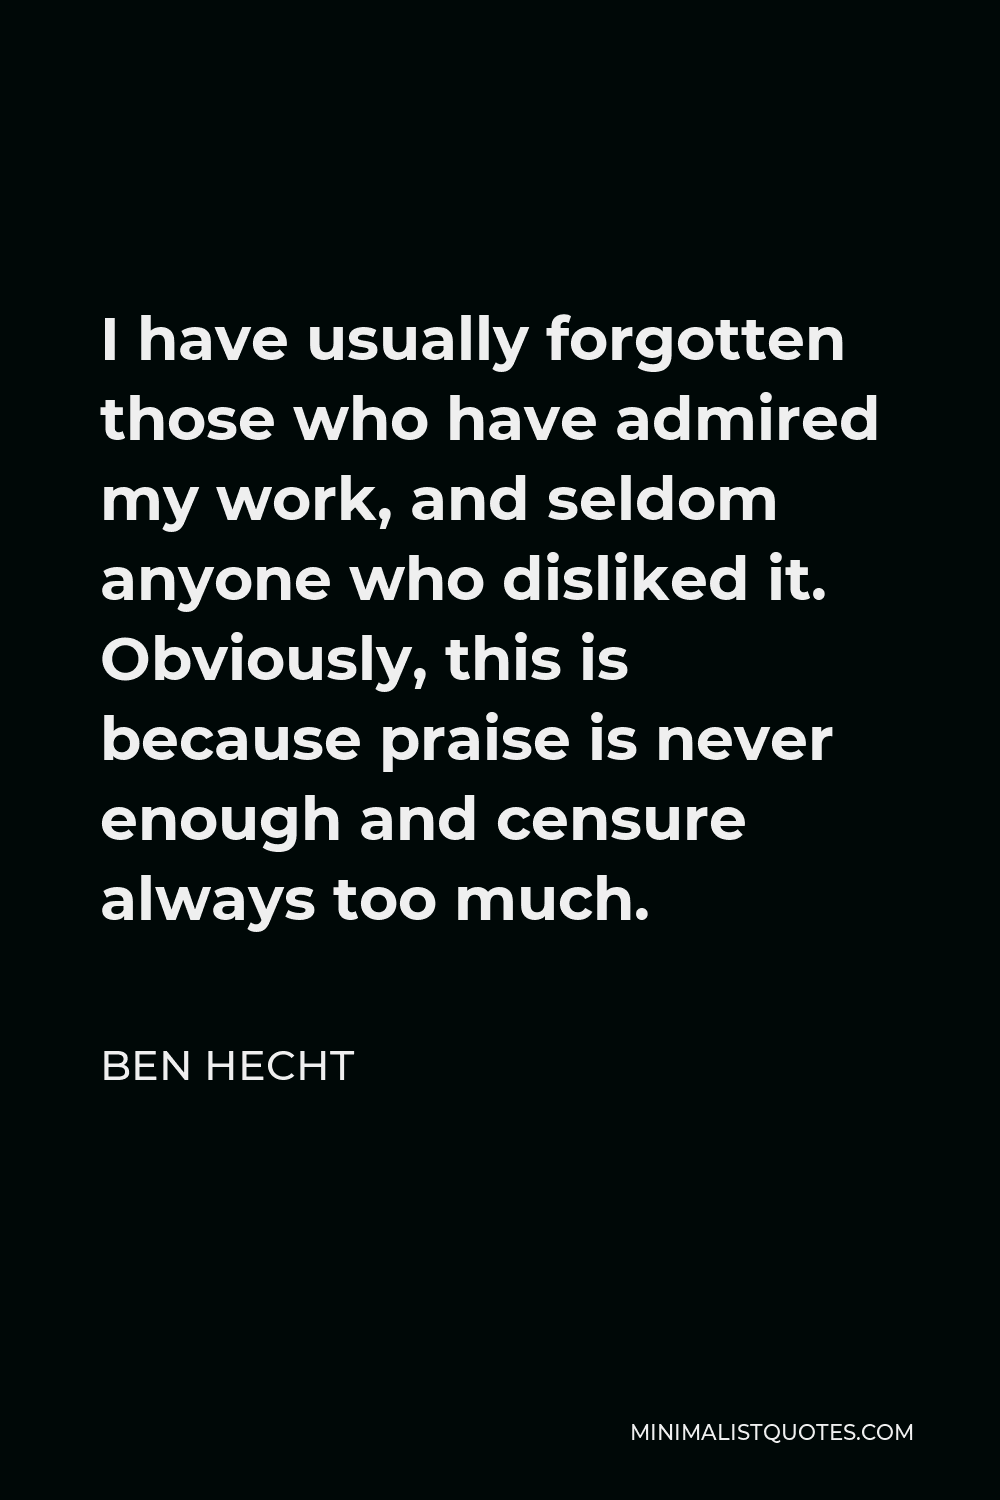 Ben Hecht Quote - I have usually forgotten those who have admired my work, and seldom anyone who disliked it. Obviously, this is because praise is never enough and censure always too much.